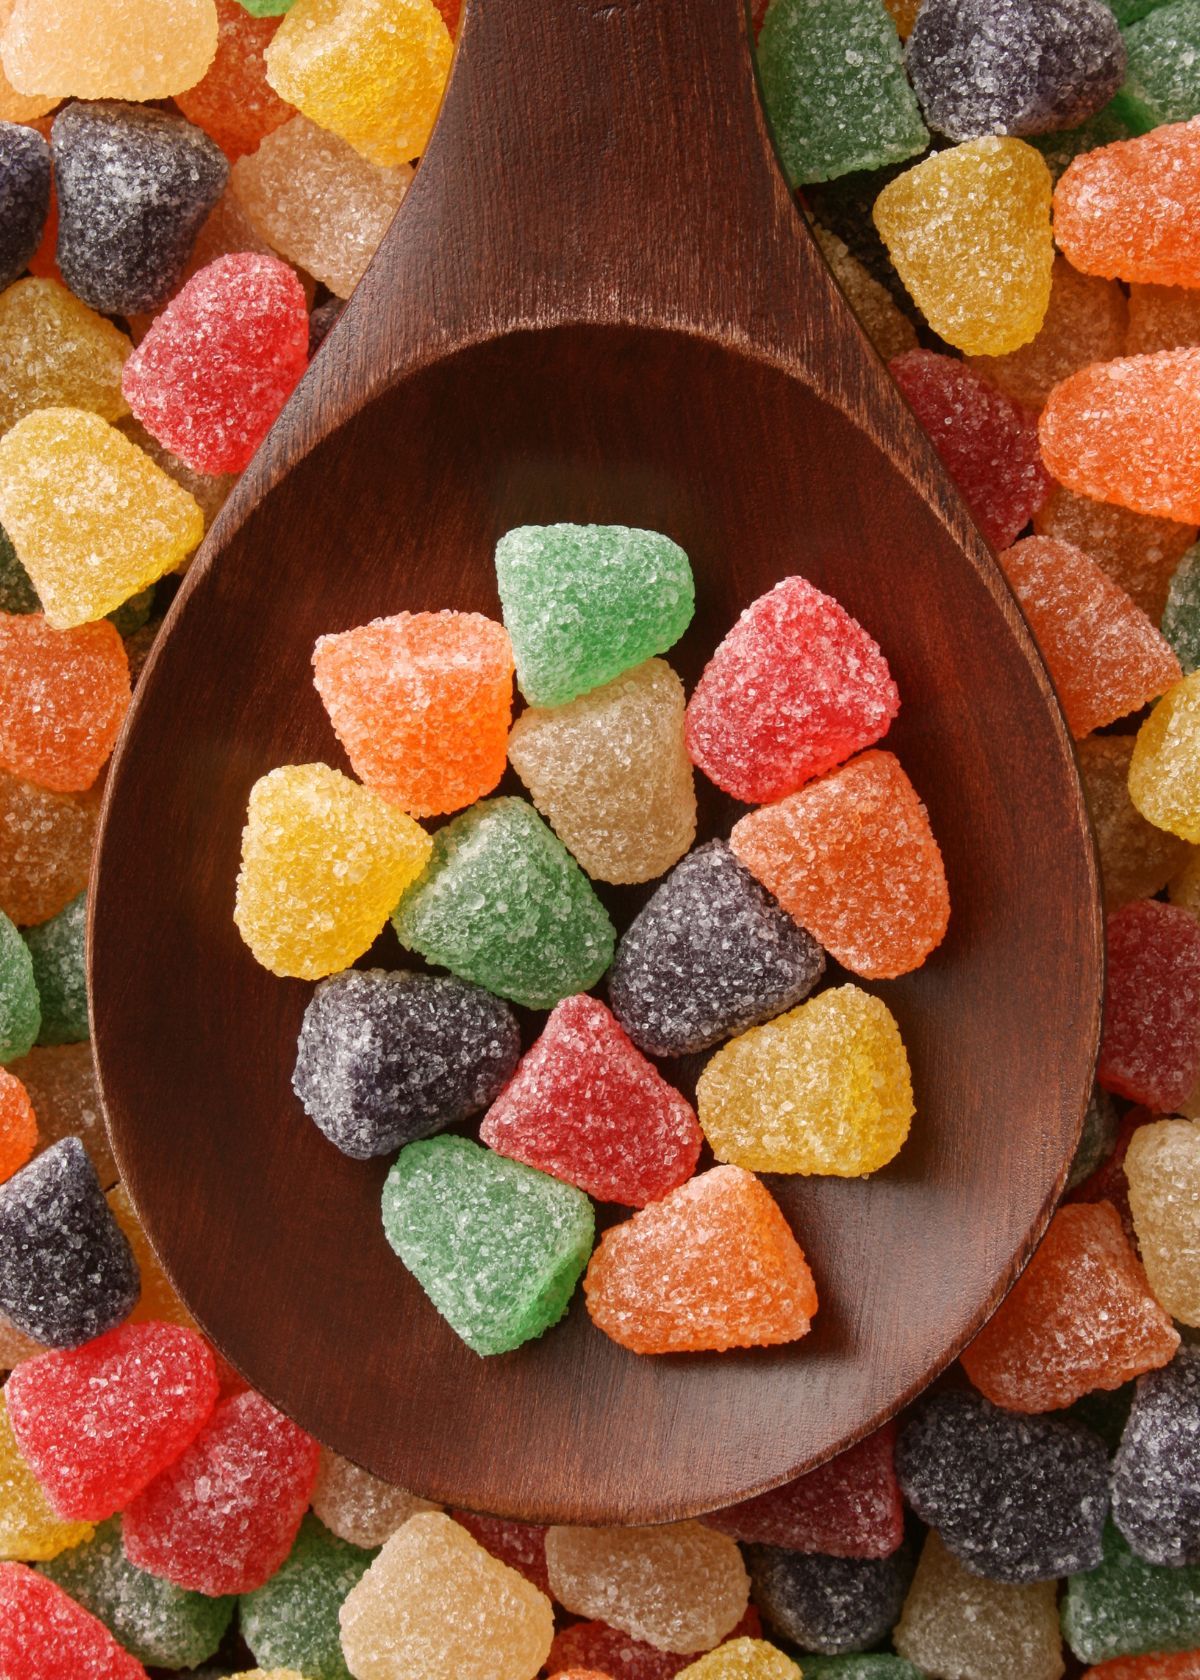 Are Gummy Bears a Good Source of Collagen